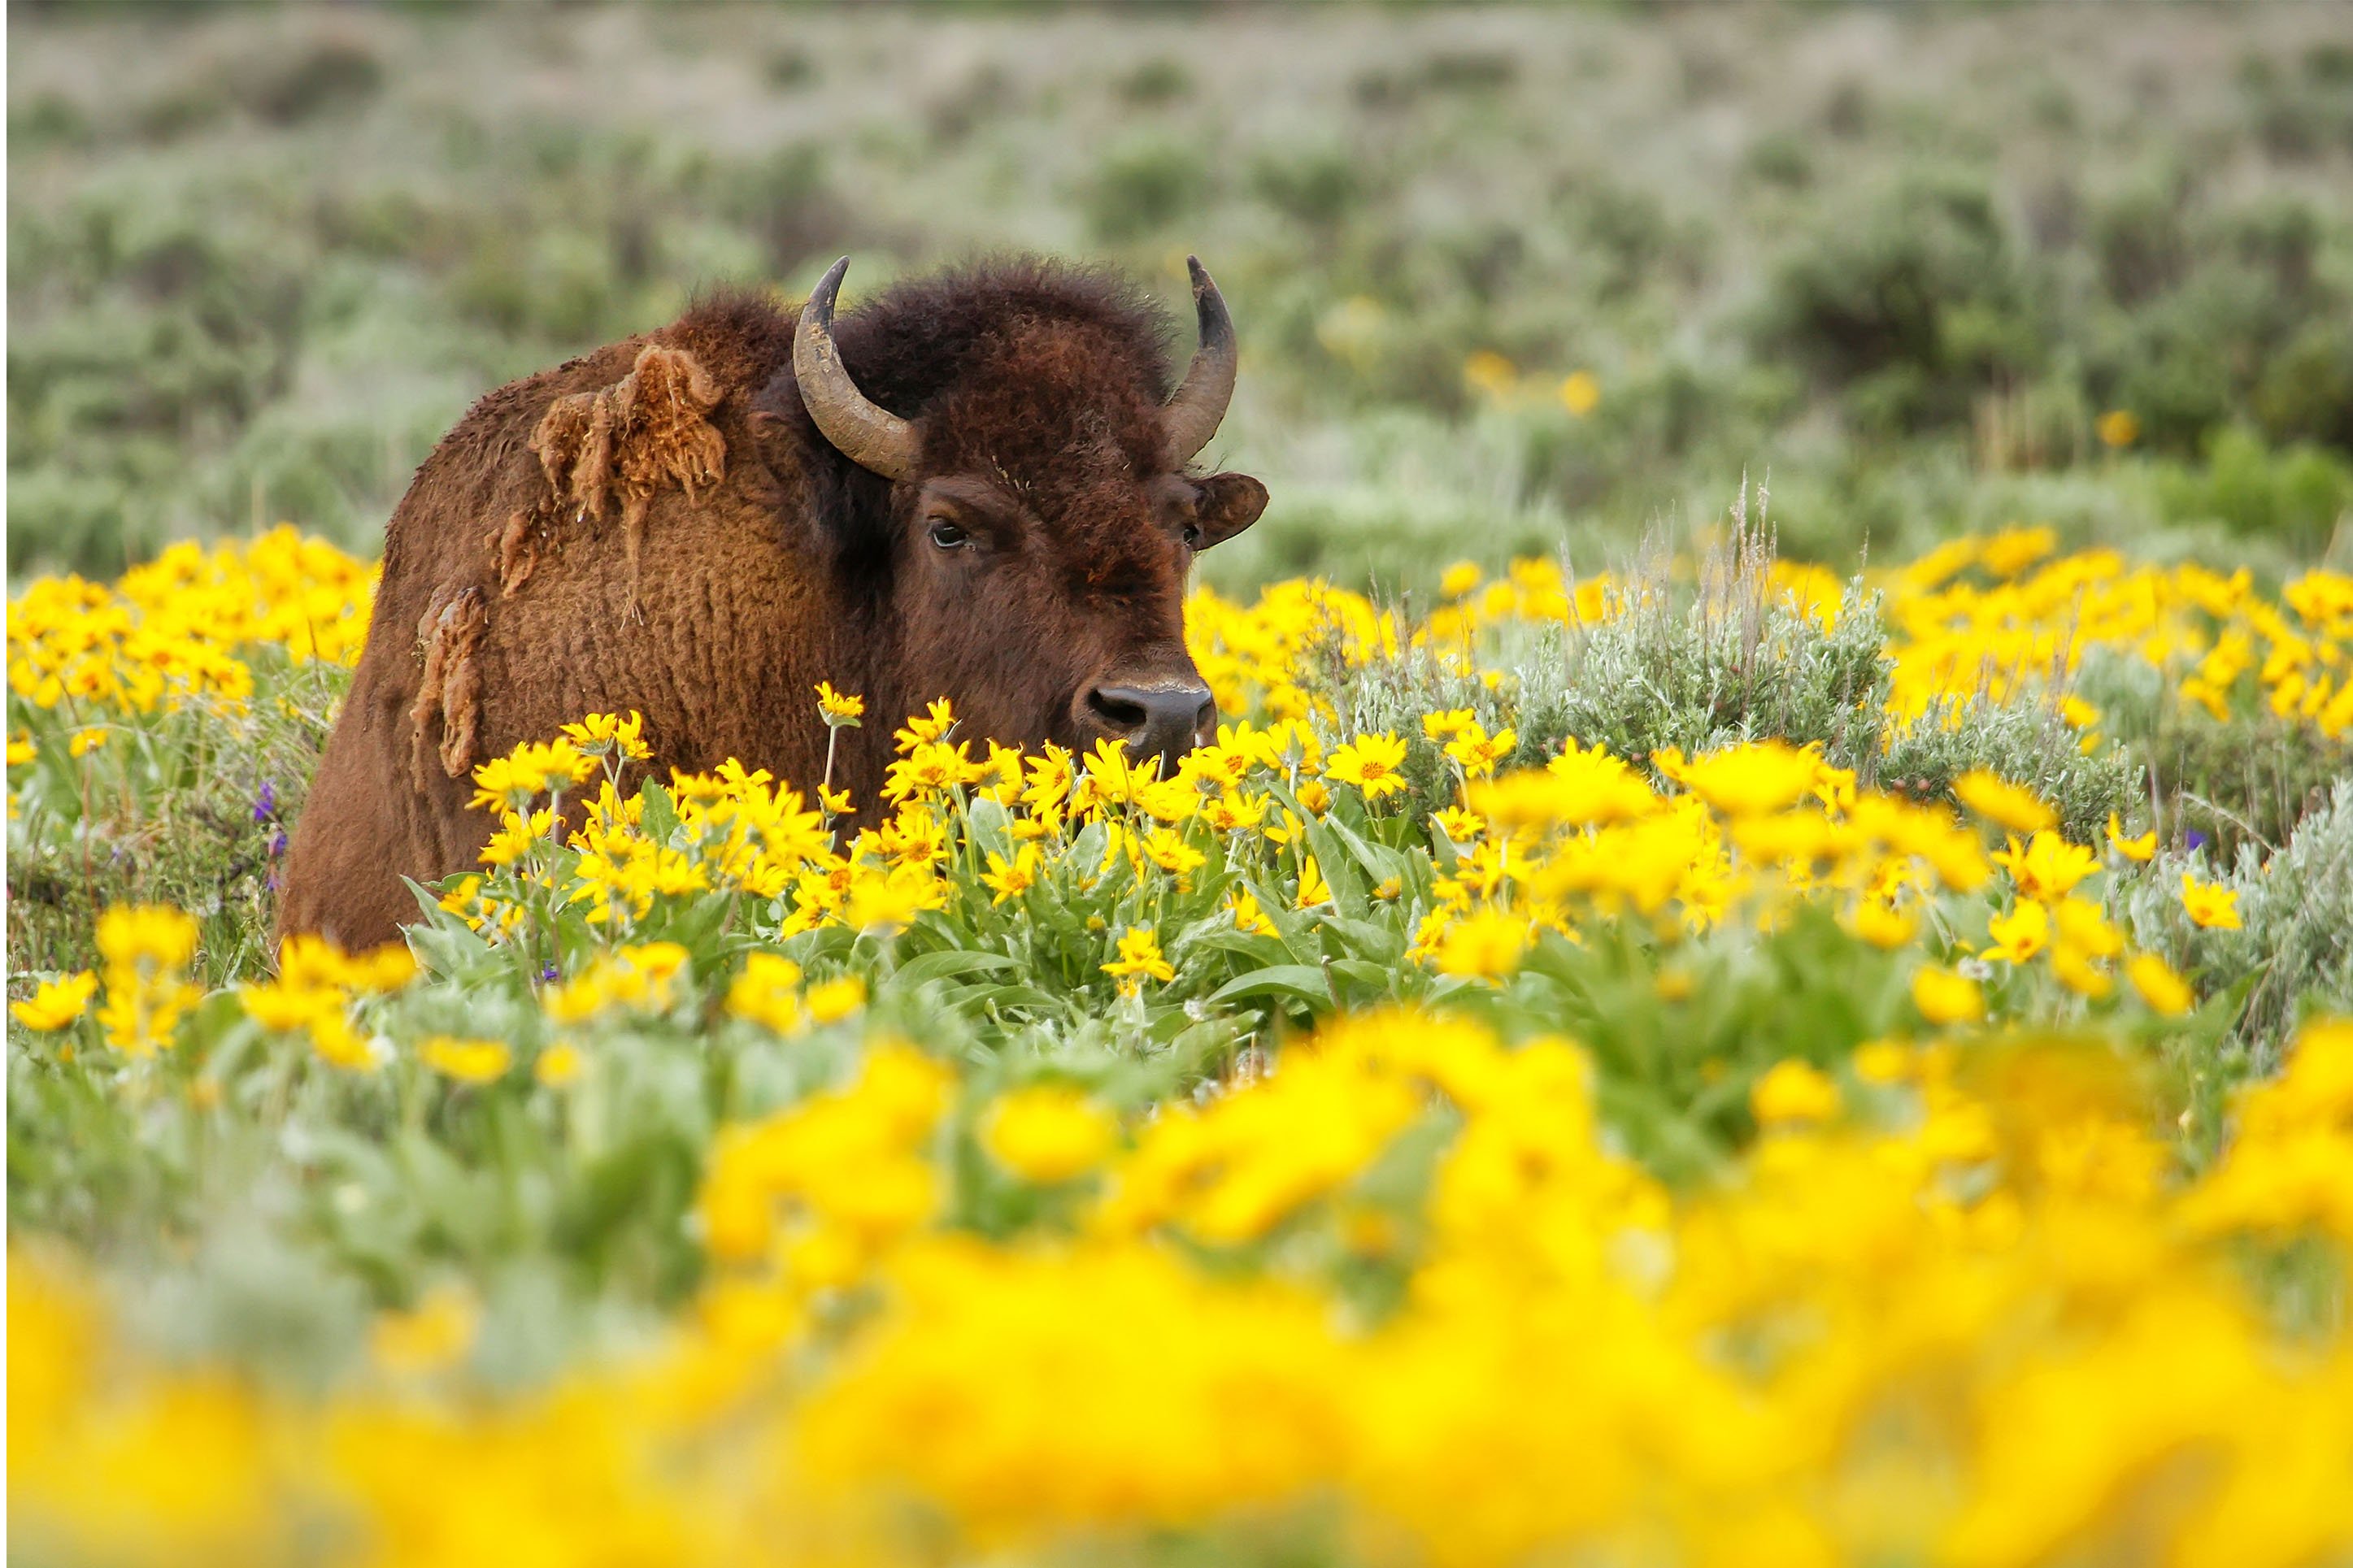 Bison in wildflowers at Yellowstone